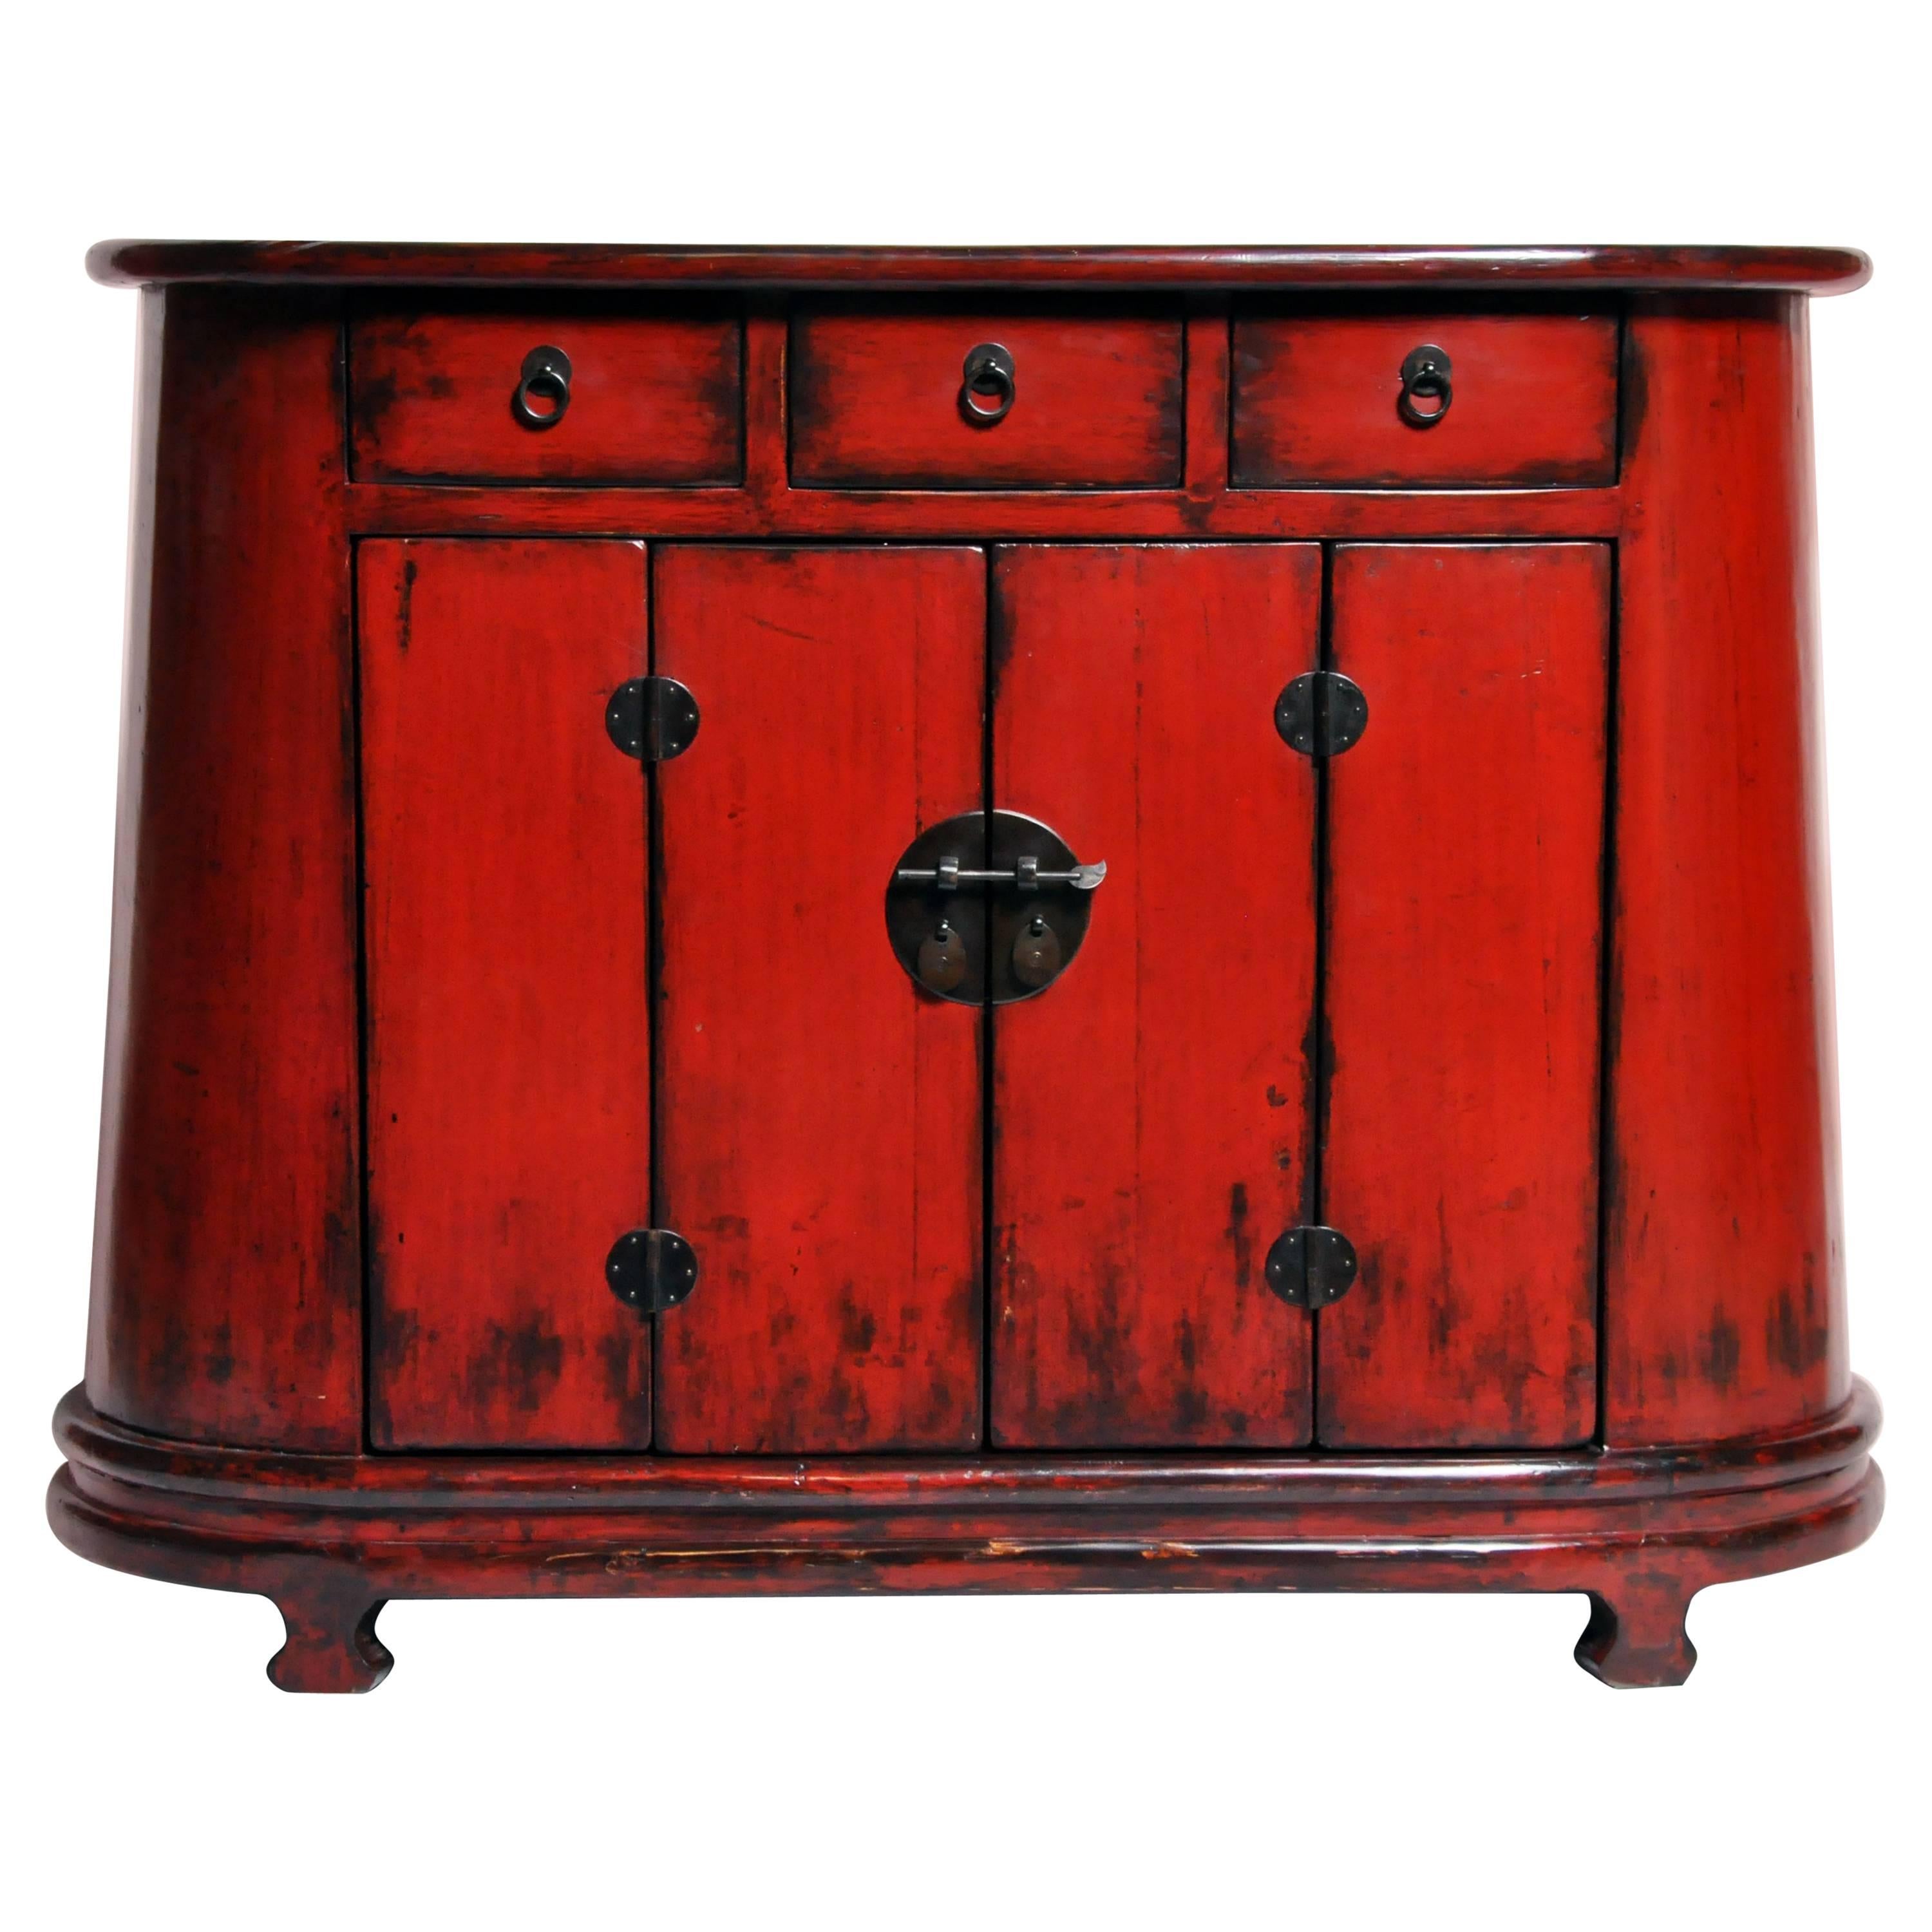 Red-Lacquered Chinese Oval Chest with Three Drawers and a Shelf